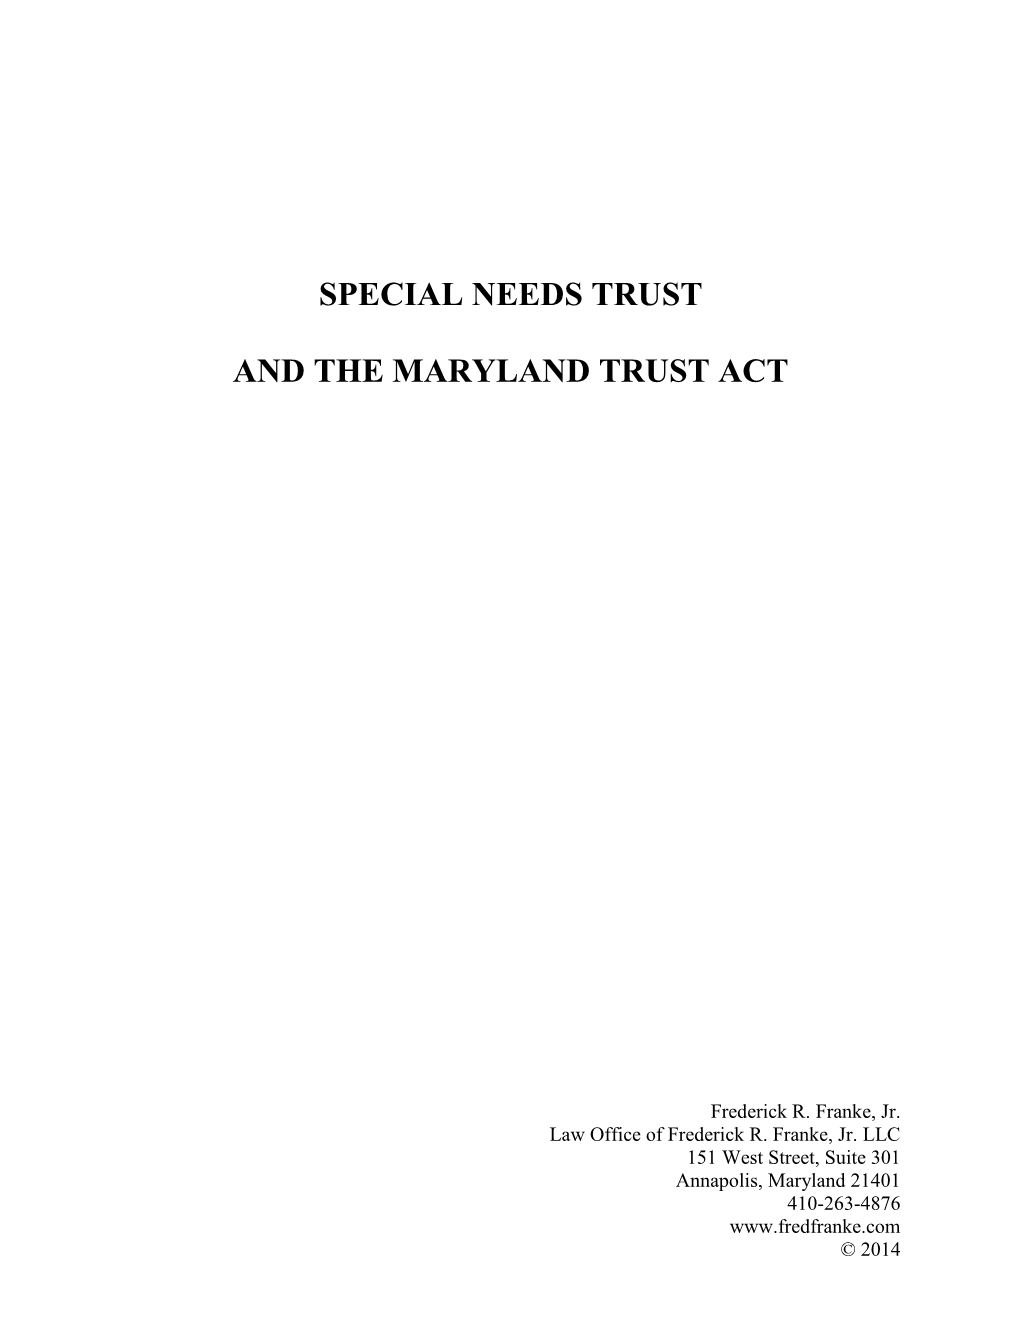 Special Needs Trust and the Maryland Trust Act